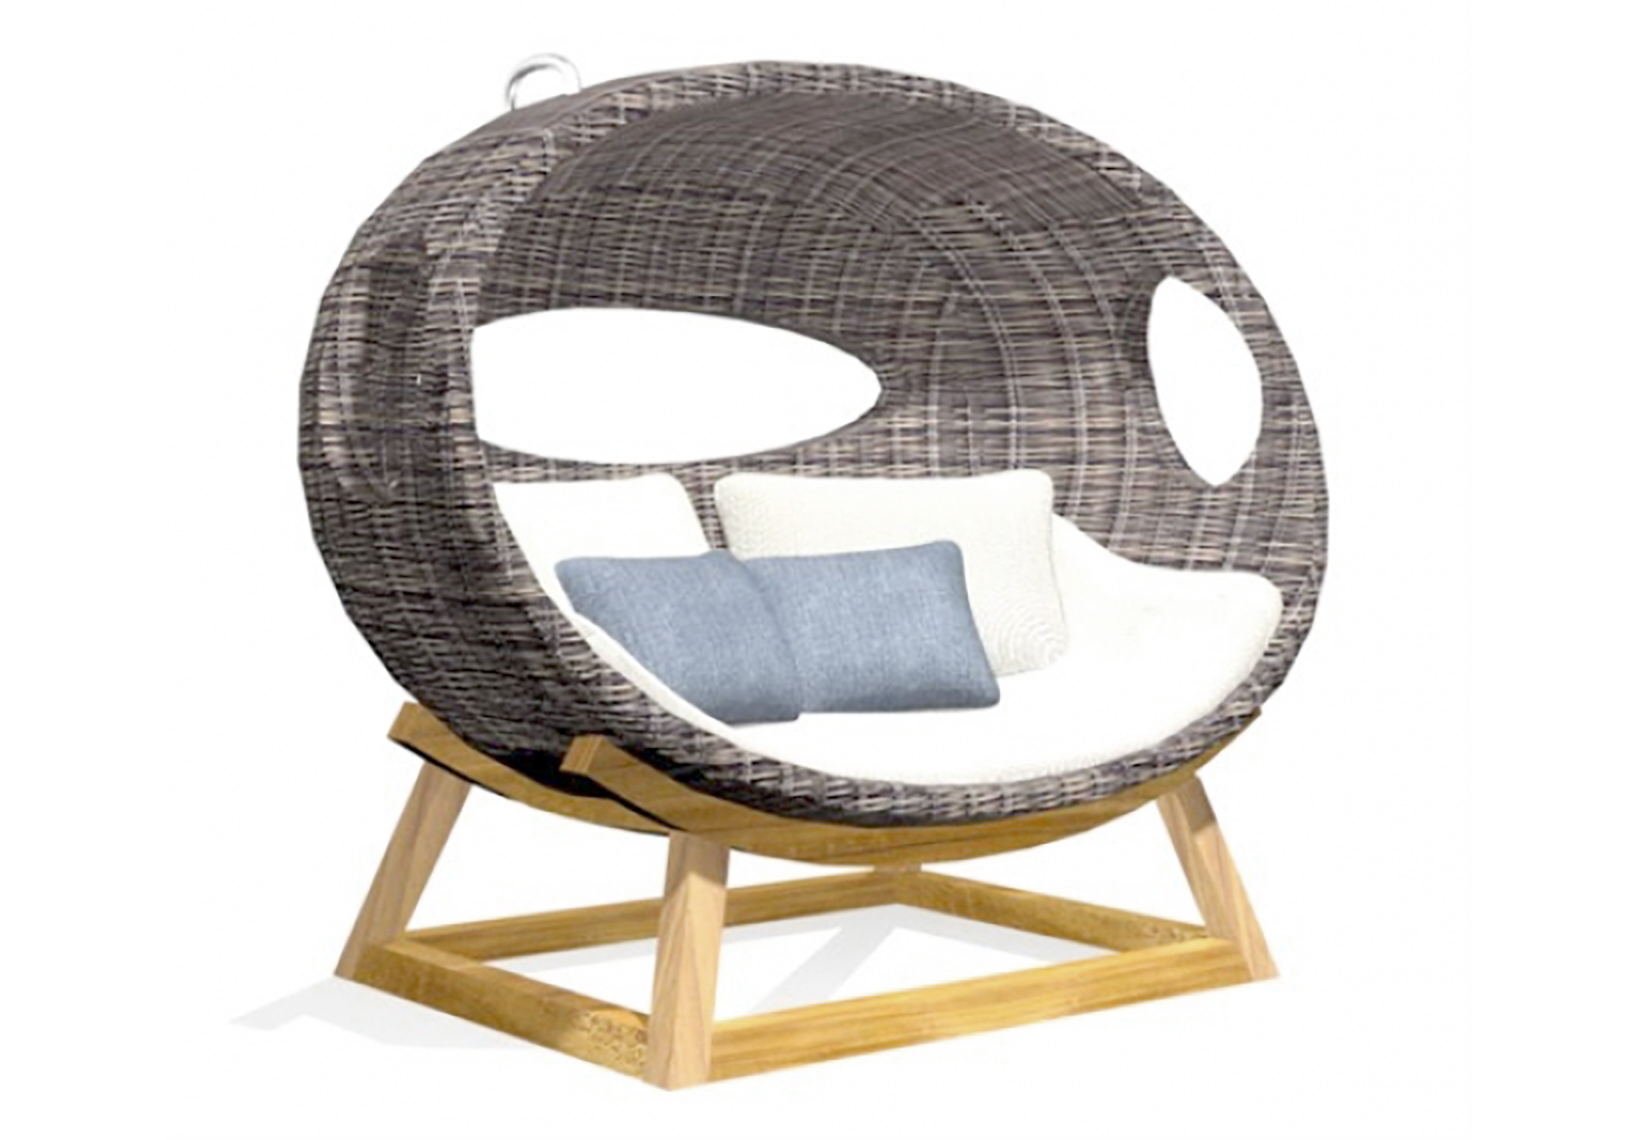 Onda Swing Lounge Chair with Stand